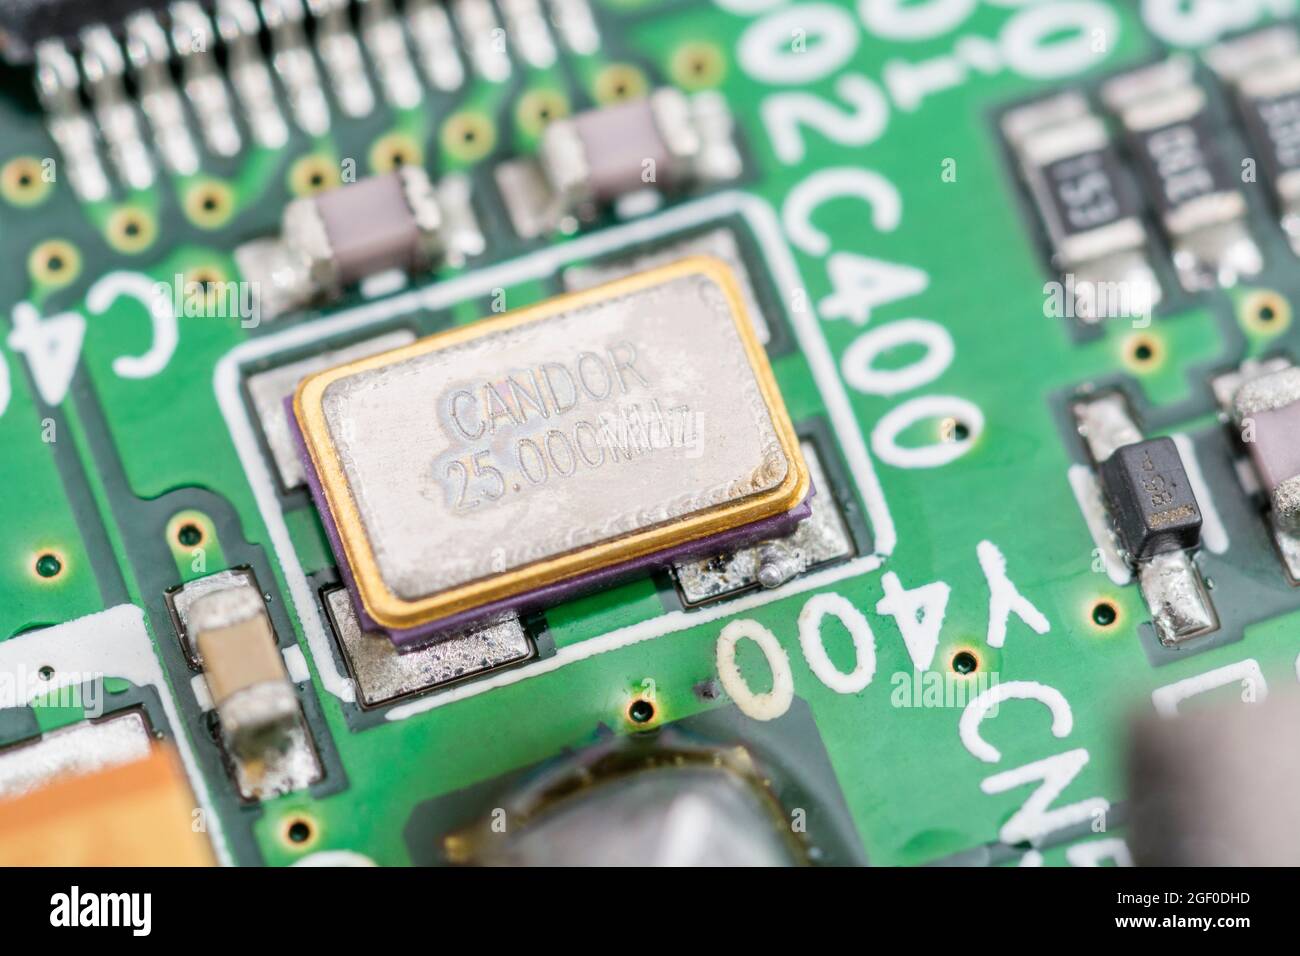 Close up macro of SM / surface mount metallic crystal oscillator on a pcb circuit board. Rated at 25Mz and made by Candor (Chinese company). Stock Photo